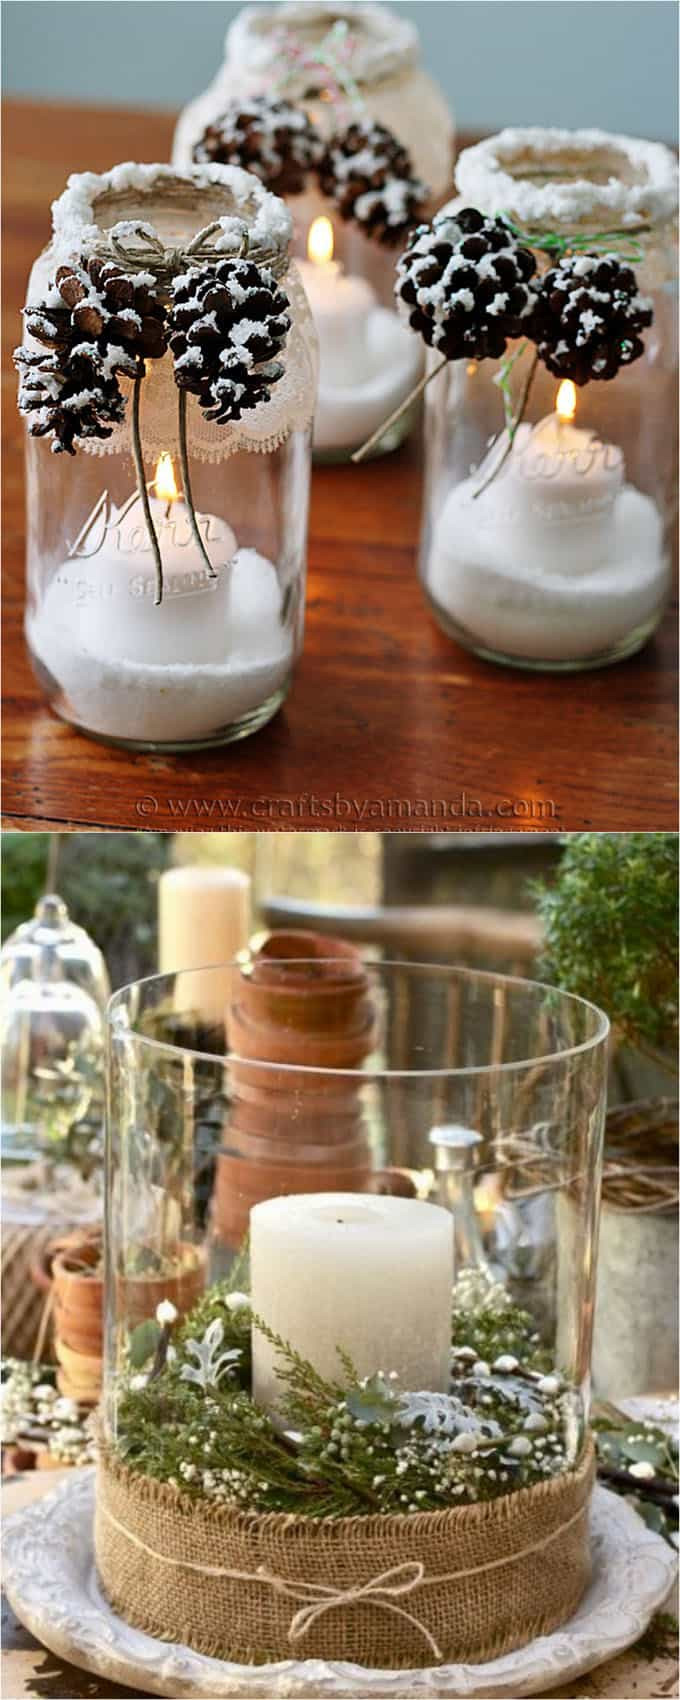 Wedding Table Decorations Pinterest
 27 Gorgeous DIY Thanksgiving & Christmas Table Decorations